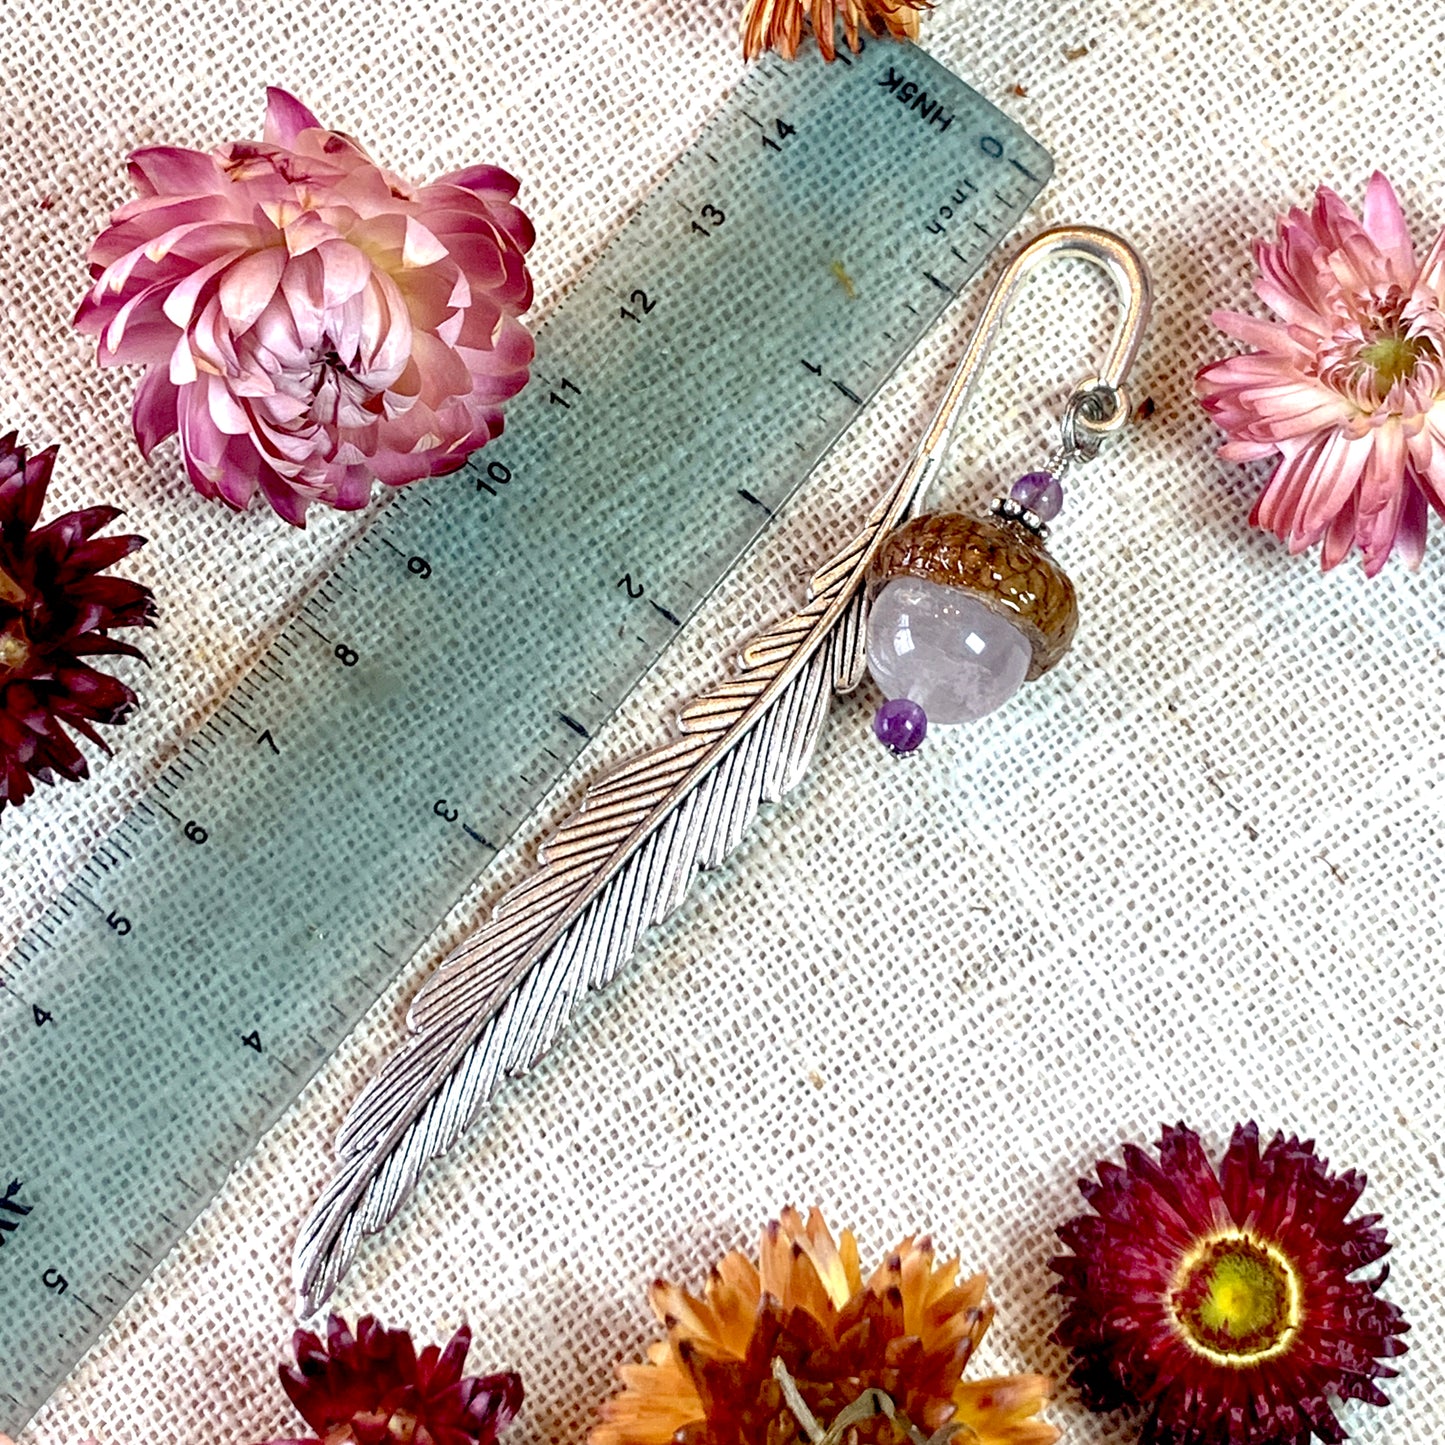 a close up of flowers on a table with a ruler